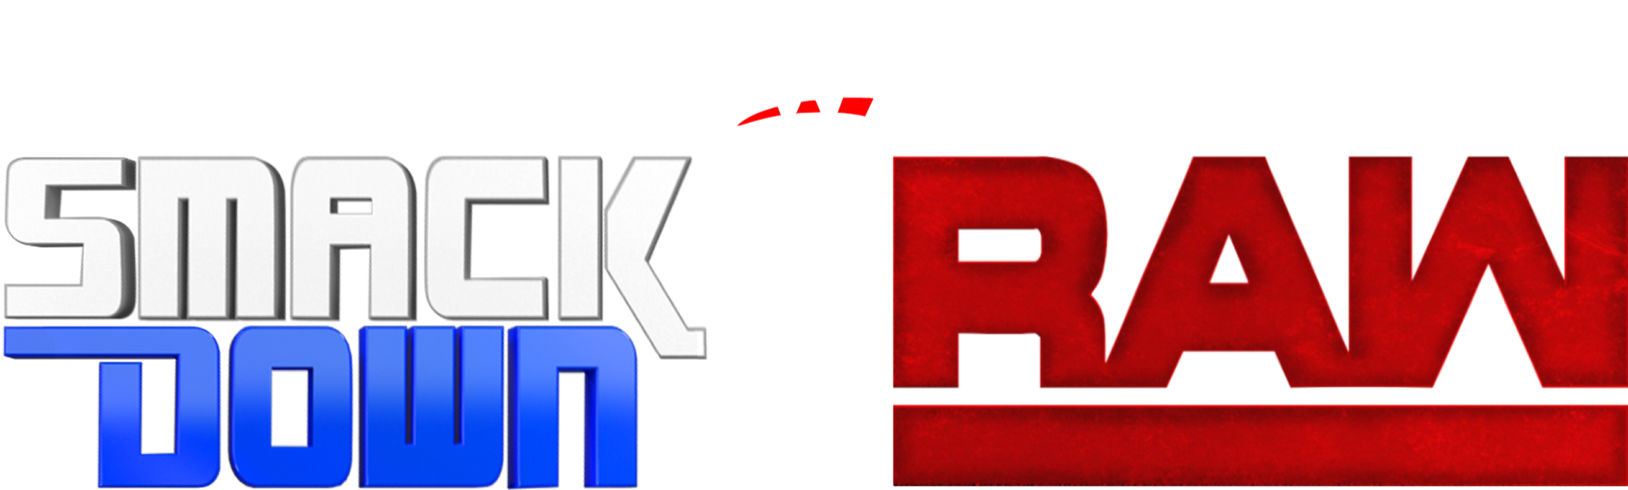 New Raw Logo Png - Wwe Smackdown Vs Raw Logo (1628x490), Png Download